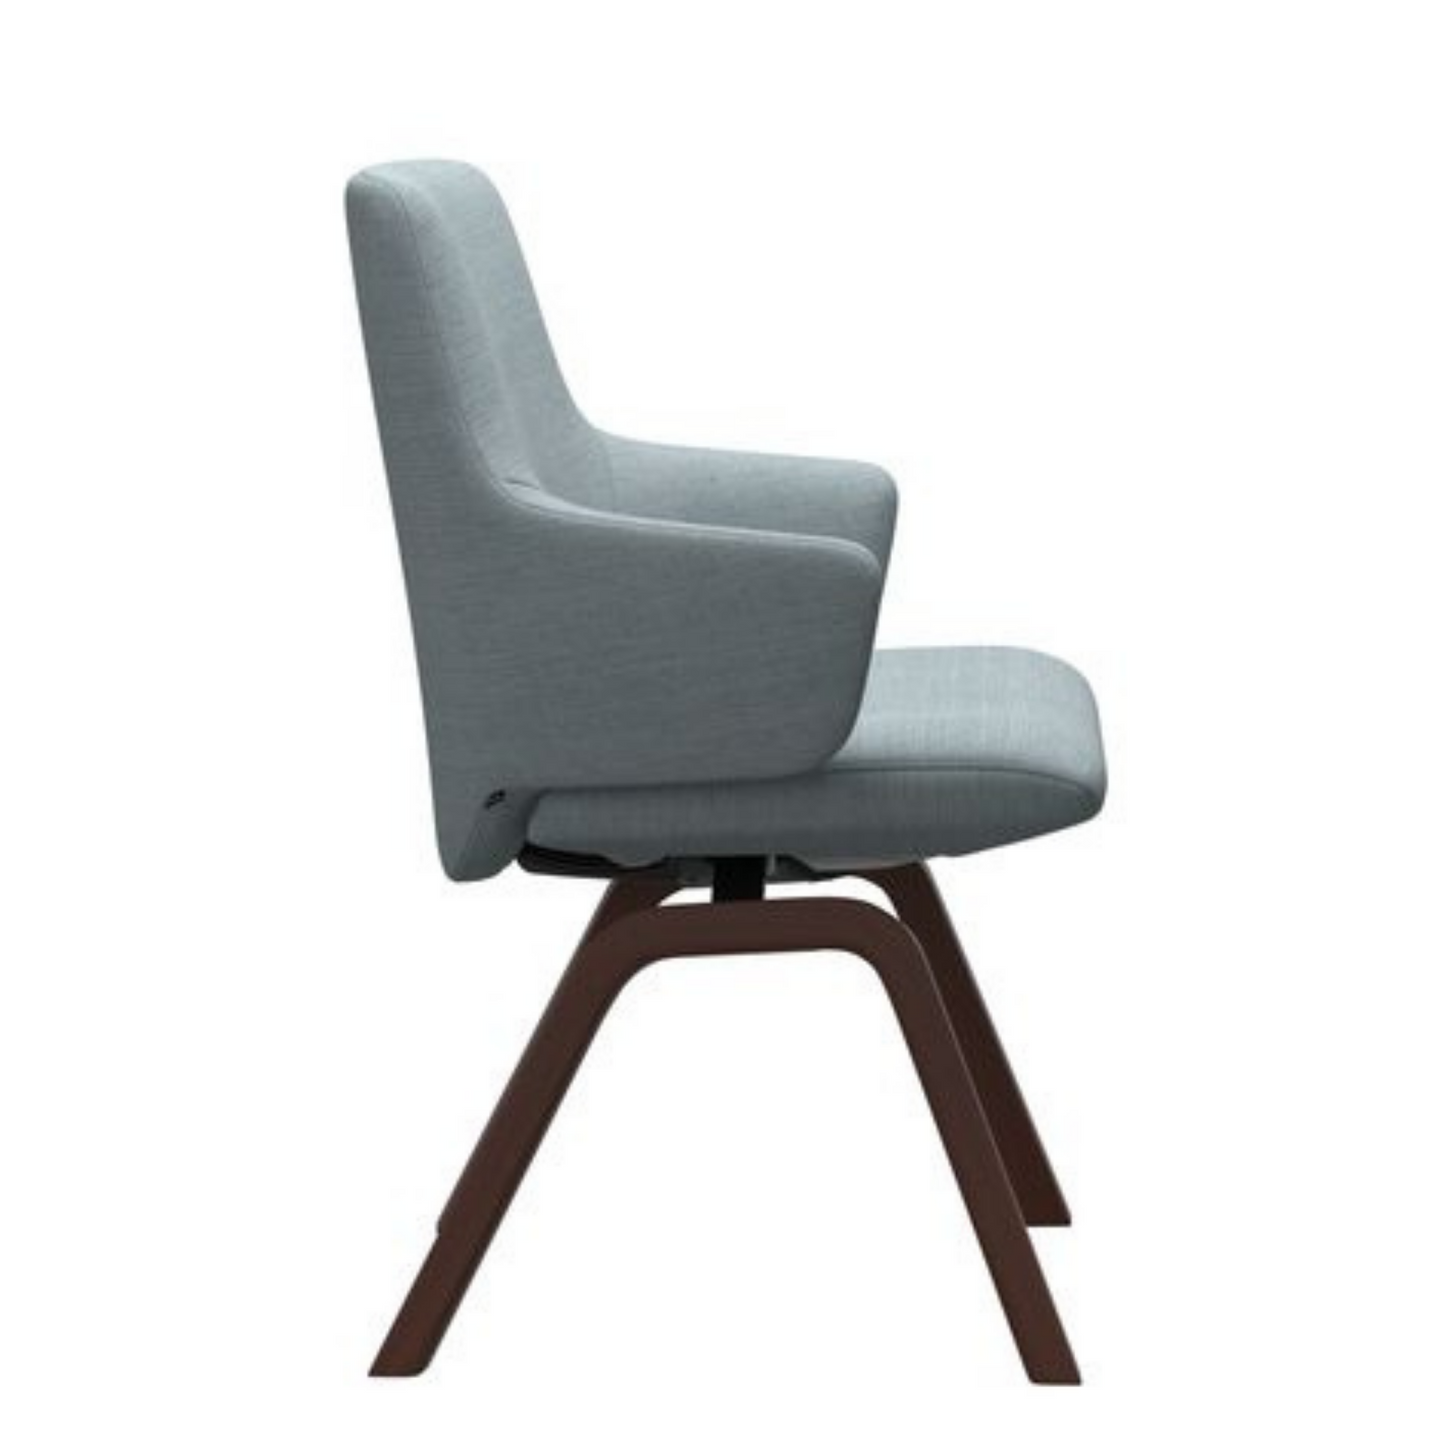 Laurel Dining Chair with Arms D200 Leg by Stressless